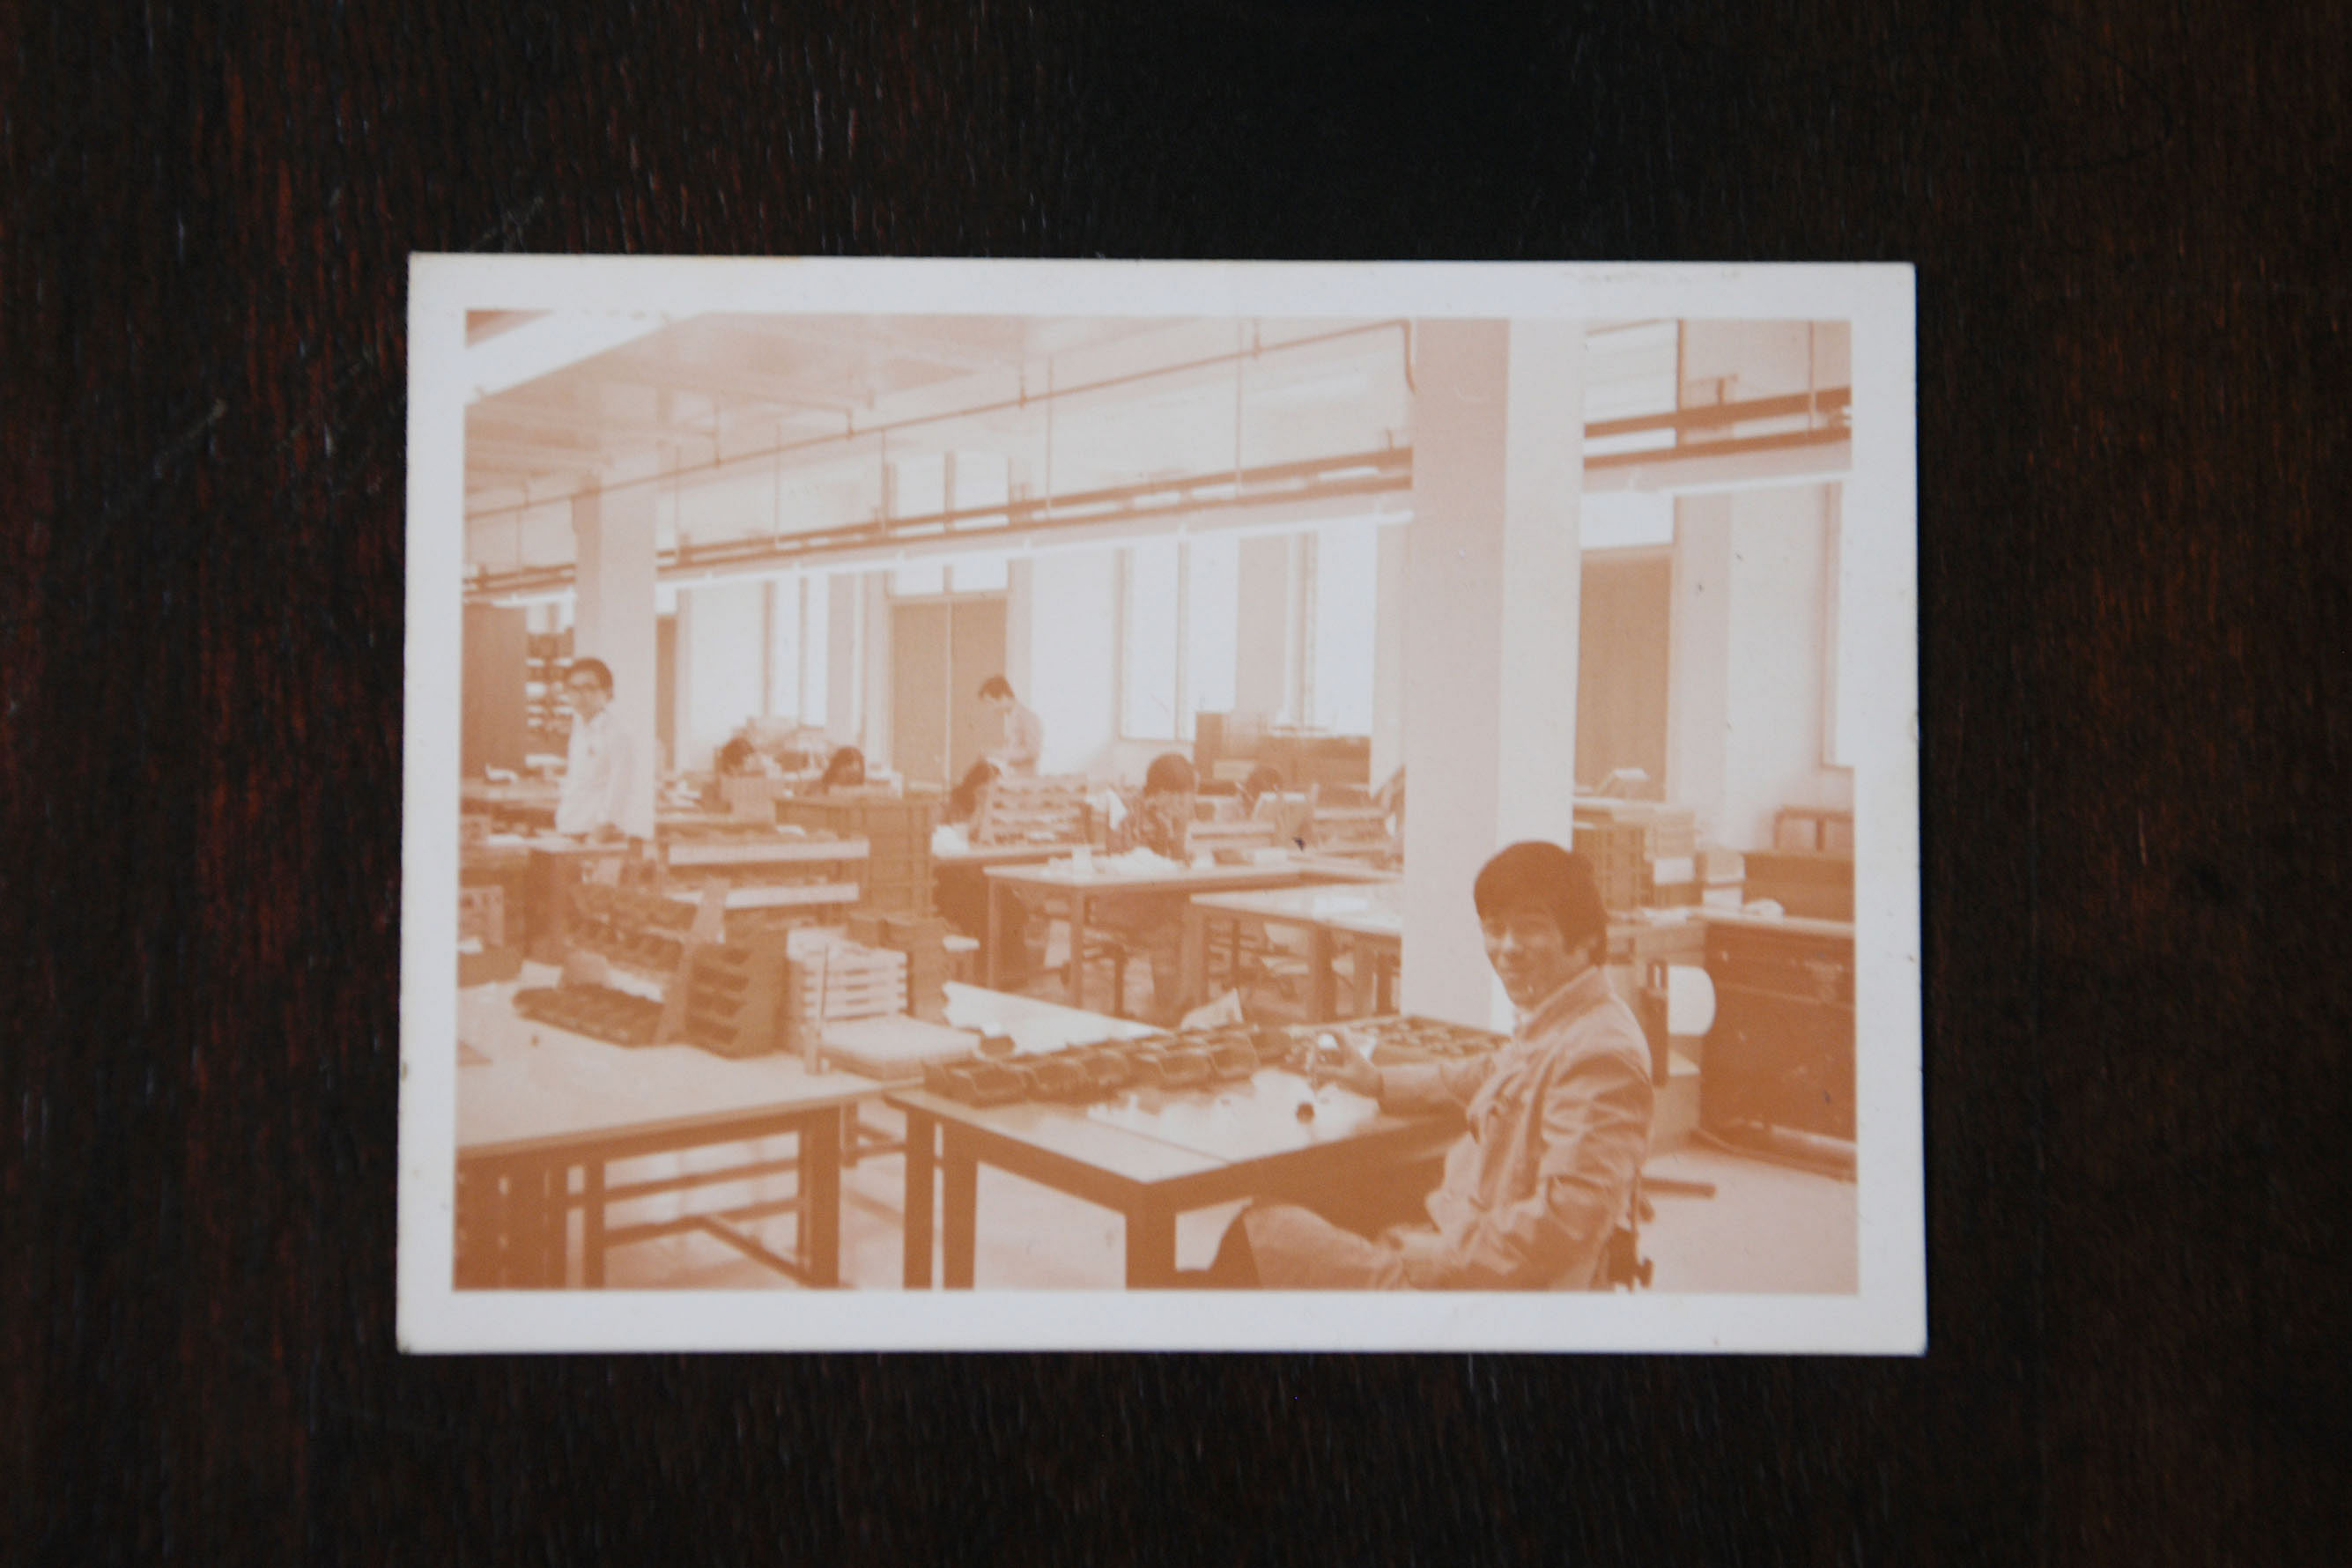 Mr Chong Nam Soy when he was a supervisor at the Rollei factory in the 1970s. The company, which produced optical instruments, was seen as one of the "best companies" to work at in Singapore, he said. Mr Chong, 68, wearing his old Rollei uniform and 